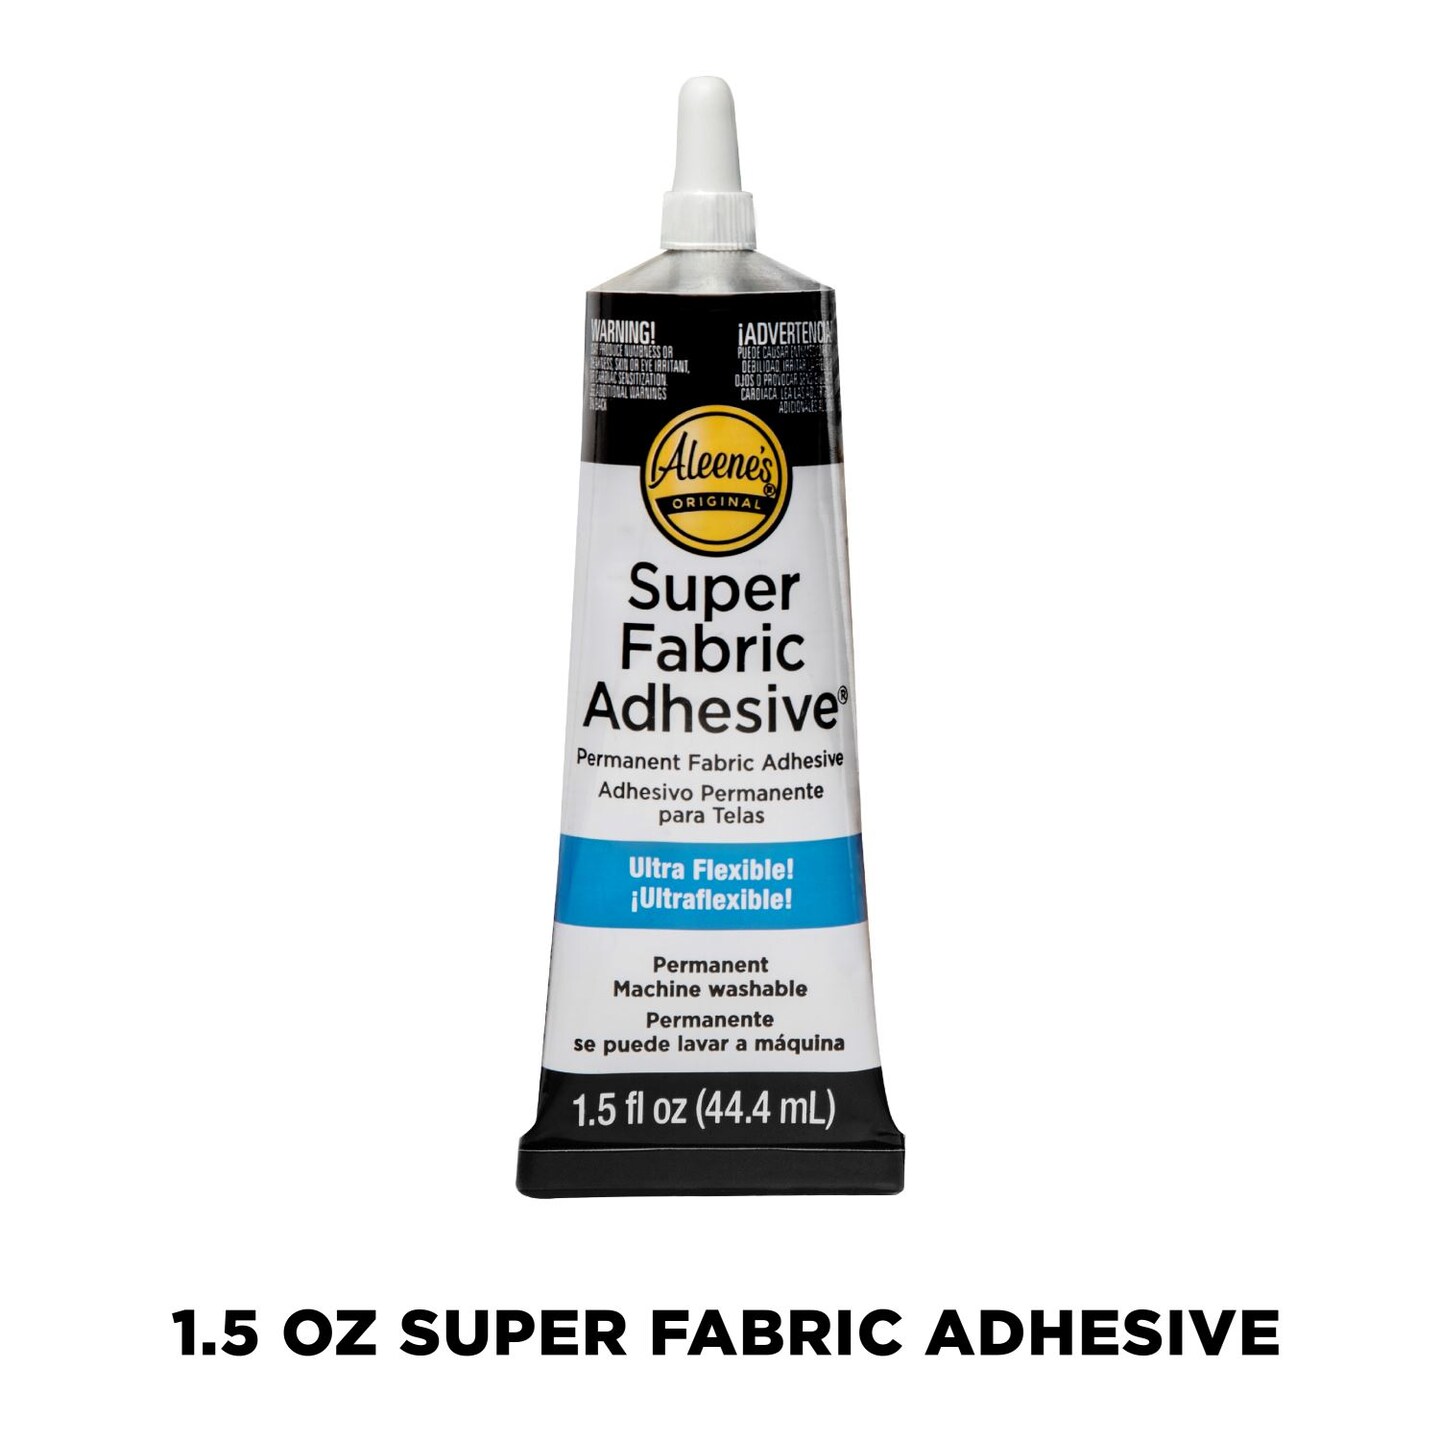 Fabric Fusion Fabric Glue Permanent Clear Washable 4oz for Patches, Rug  Glue, Clothing Glue, No Sew Fabric Glue with Pixiss Art Dotting Stylus Pens  5